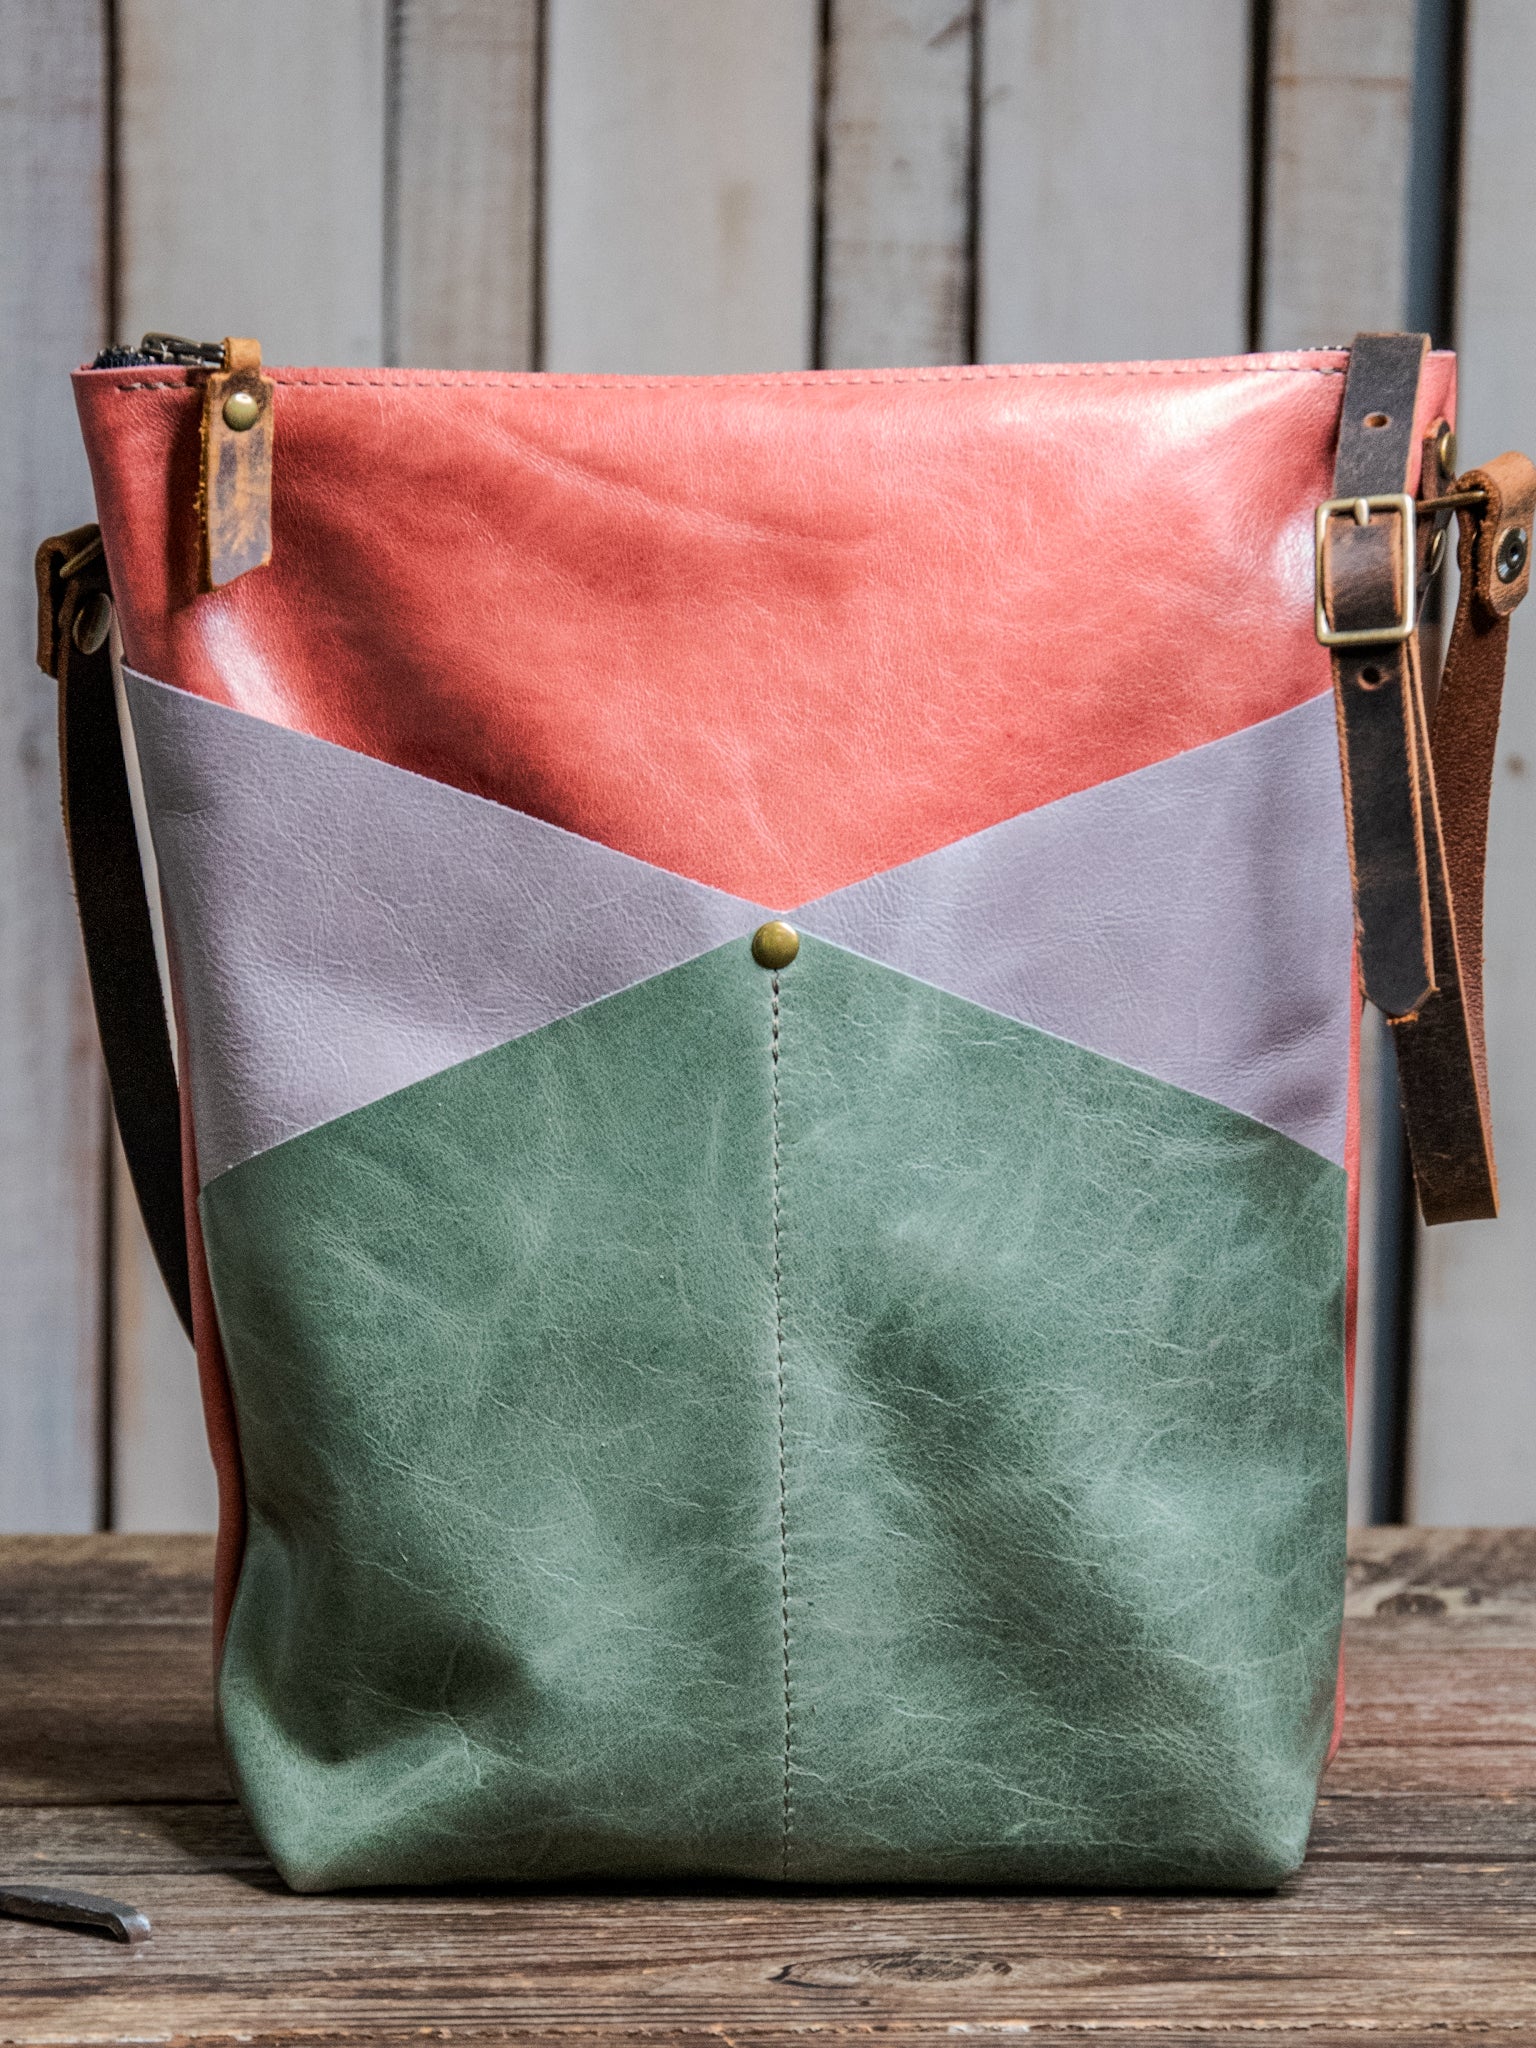 Ready to Ship | One of a Kind | Handmade Leather Tote Bag | The Tall tote by Krista! | M44